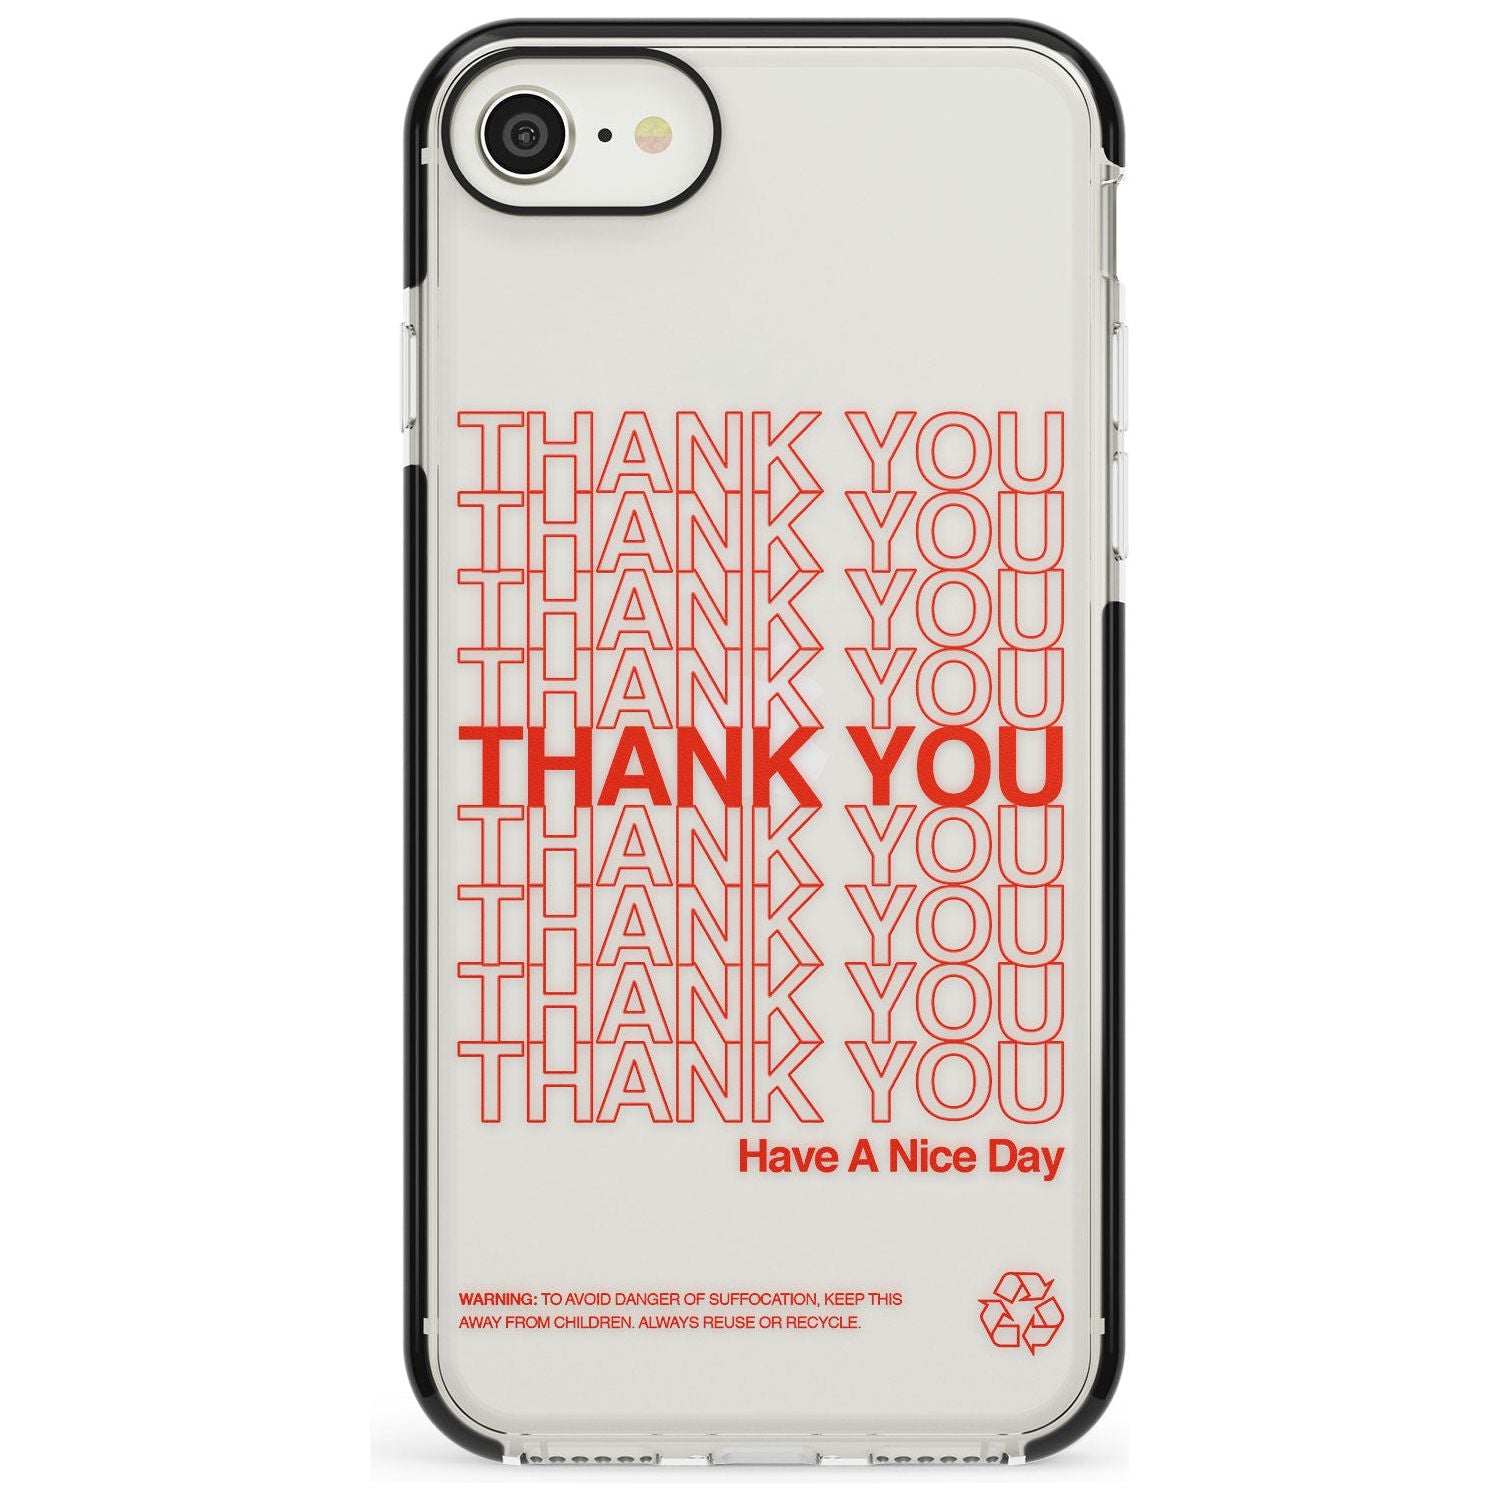 Classic Thank You Bag Design: Solid White + Red Black Impact Phone Case for iPhone SE 8 7 Plus